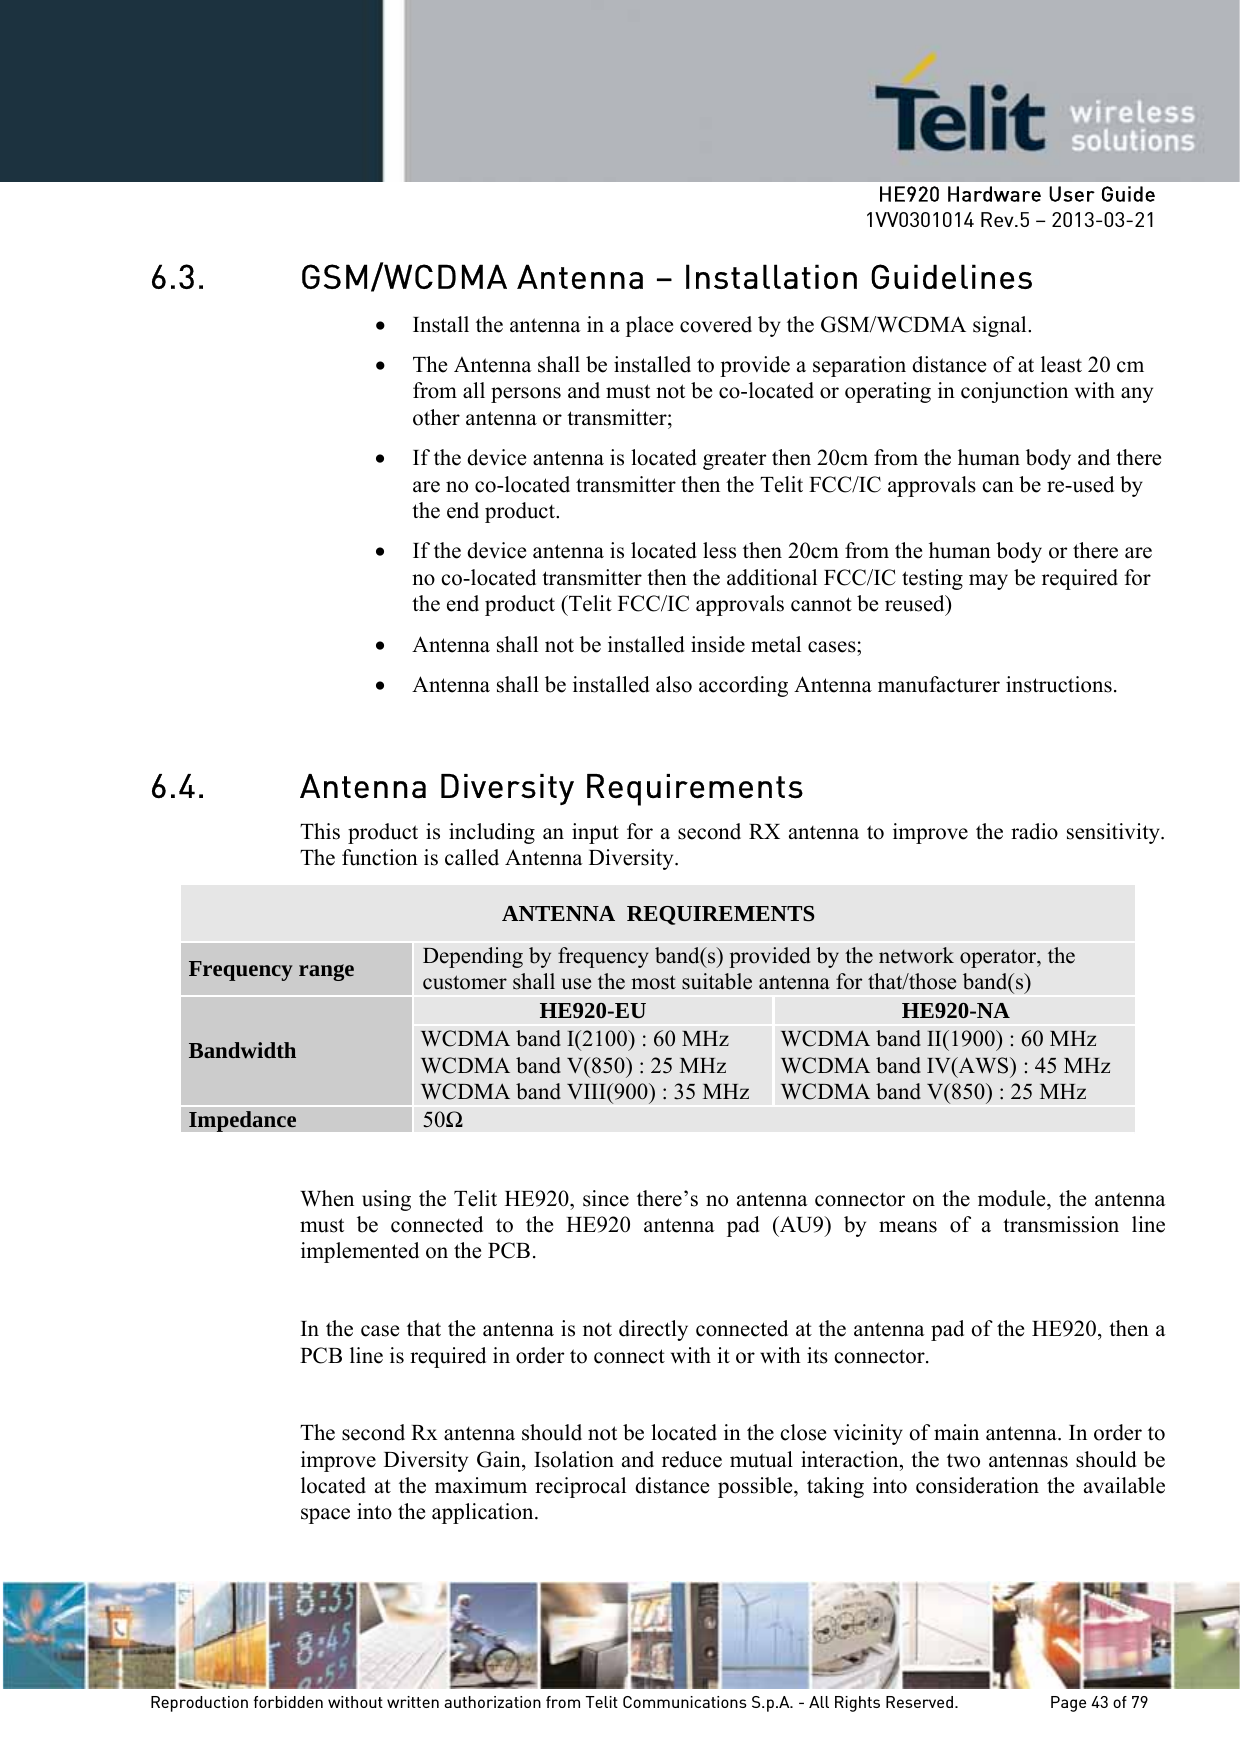     HE920 Hardware User Guide 1VV0301014 Rev.5 – 2013-03-21 Reproduction forbidden without written authorization from Telit Communications S.p.A. - All Rights Reserved.    Page 43 of 79  6.3. GSM/WCDMA Antenna – Installation Guidelines • Install the antenna in a place covered by the GSM/WCDMA signal. • The Antenna shall be installed to provide a separation distance of at least 20 cm from all persons and must not be co-located or operating in conjunction with any other antenna or transmitter; • If the device antenna is located greater then 20cm from the human body and there are no co-located transmitter then the Telit FCC/IC approvals can be re-used by the end product. • If the device antenna is located less then 20cm from the human body or there are no co-located transmitter then the additional FCC/IC testing may be required for the end product (Telit FCC/IC approvals cannot be reused)  • Antenna shall not be installed inside metal cases;  • Antenna shall be installed also according Antenna manufacturer instructions.  6.4. Antenna Diversity Requirements This product is including an input for a second RX antenna to improve the radio sensitivity. The function is called Antenna Diversity. ANTENNA  REQUIREMENTS Frequency range  Depending by frequency band(s) provided by the network operator, the customer shall use the most suitable antenna for that/those band(s) Bandwidth HE920-EU  HE920-NA WCDMA band I(2100) : 60 MHz WCDMA band V(850) : 25 MHz WCDMA band VIII(900) : 35 MHz WCDMA band II(1900) : 60 MHz WCDMA band IV(AWS) : 45 MHz WCDMA band V(850) : 25 MHz Impedance  50  When using the Telit HE920, since there’s no antenna connector on the module, the antenna must be connected to the HE920 antenna pad (AU9) by means of a transmission line implemented on the PCB.  In the case that the antenna is not directly connected at the antenna pad of the HE920, then a PCB line is required in order to connect with it or with its connector.  The second Rx antenna should not be located in the close vicinity of main antenna. In order to improve Diversity Gain, Isolation and reduce mutual interaction, the two antennas should be located at the maximum reciprocal distance possible, taking into consideration the available space into the application.  